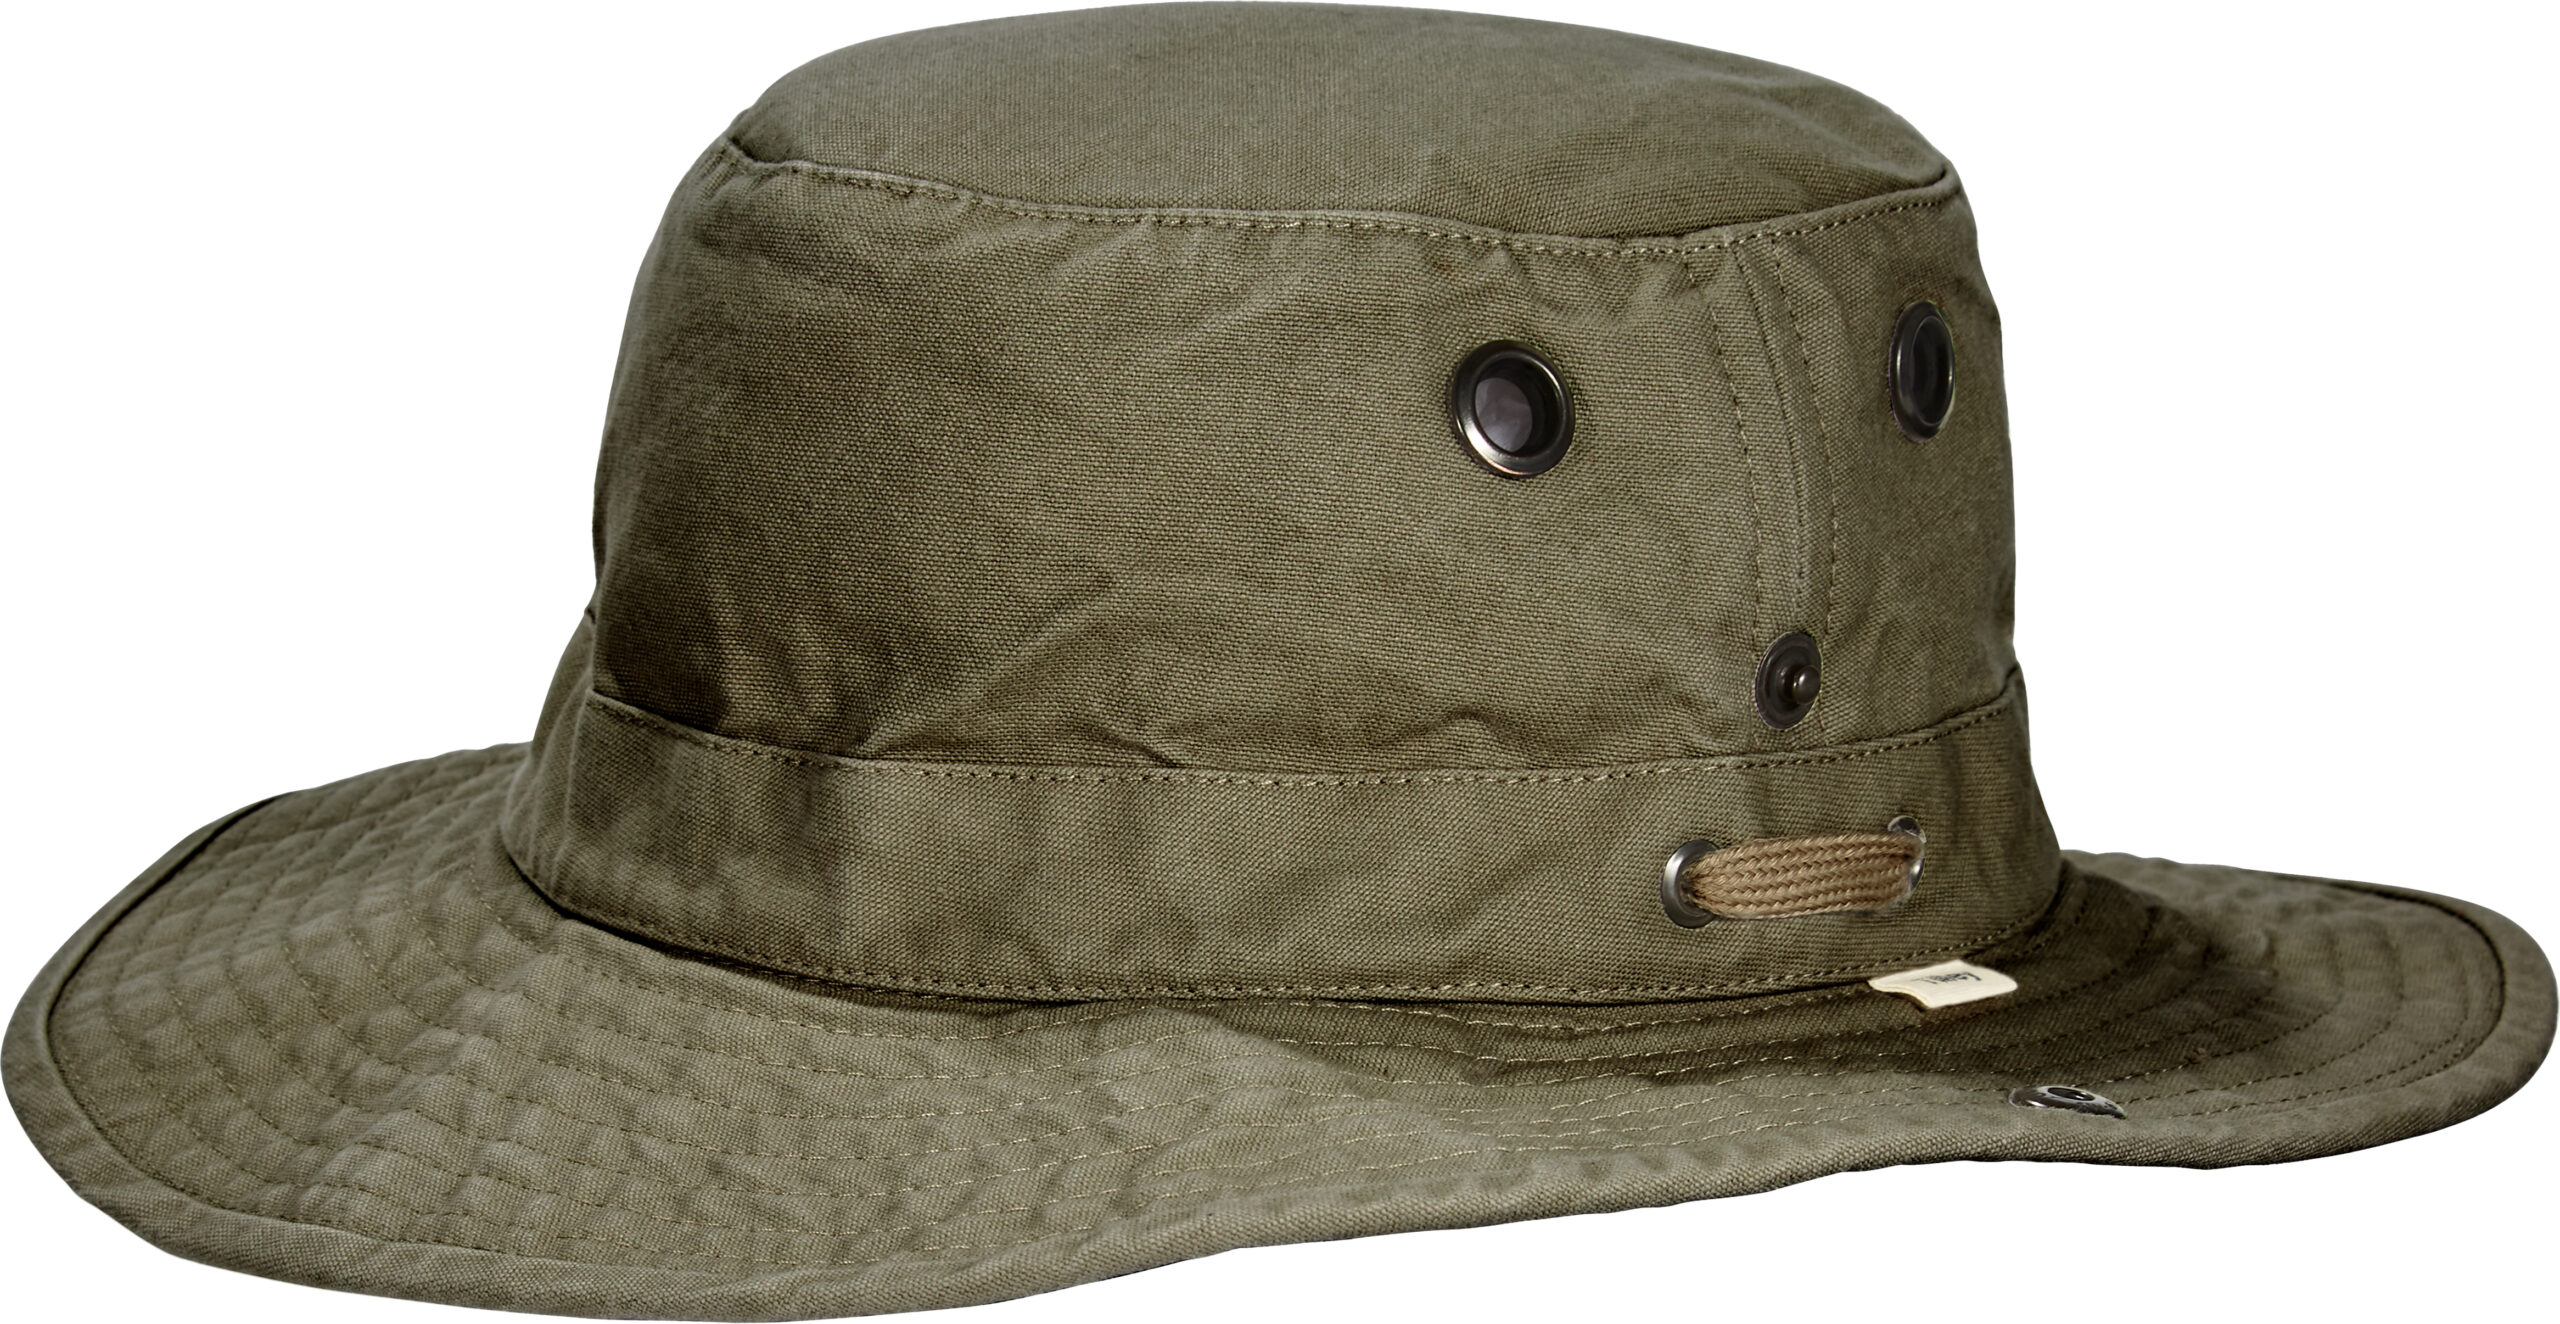 OLIVE T3 WANDERER TILLEY HAT - Cain of Heswall